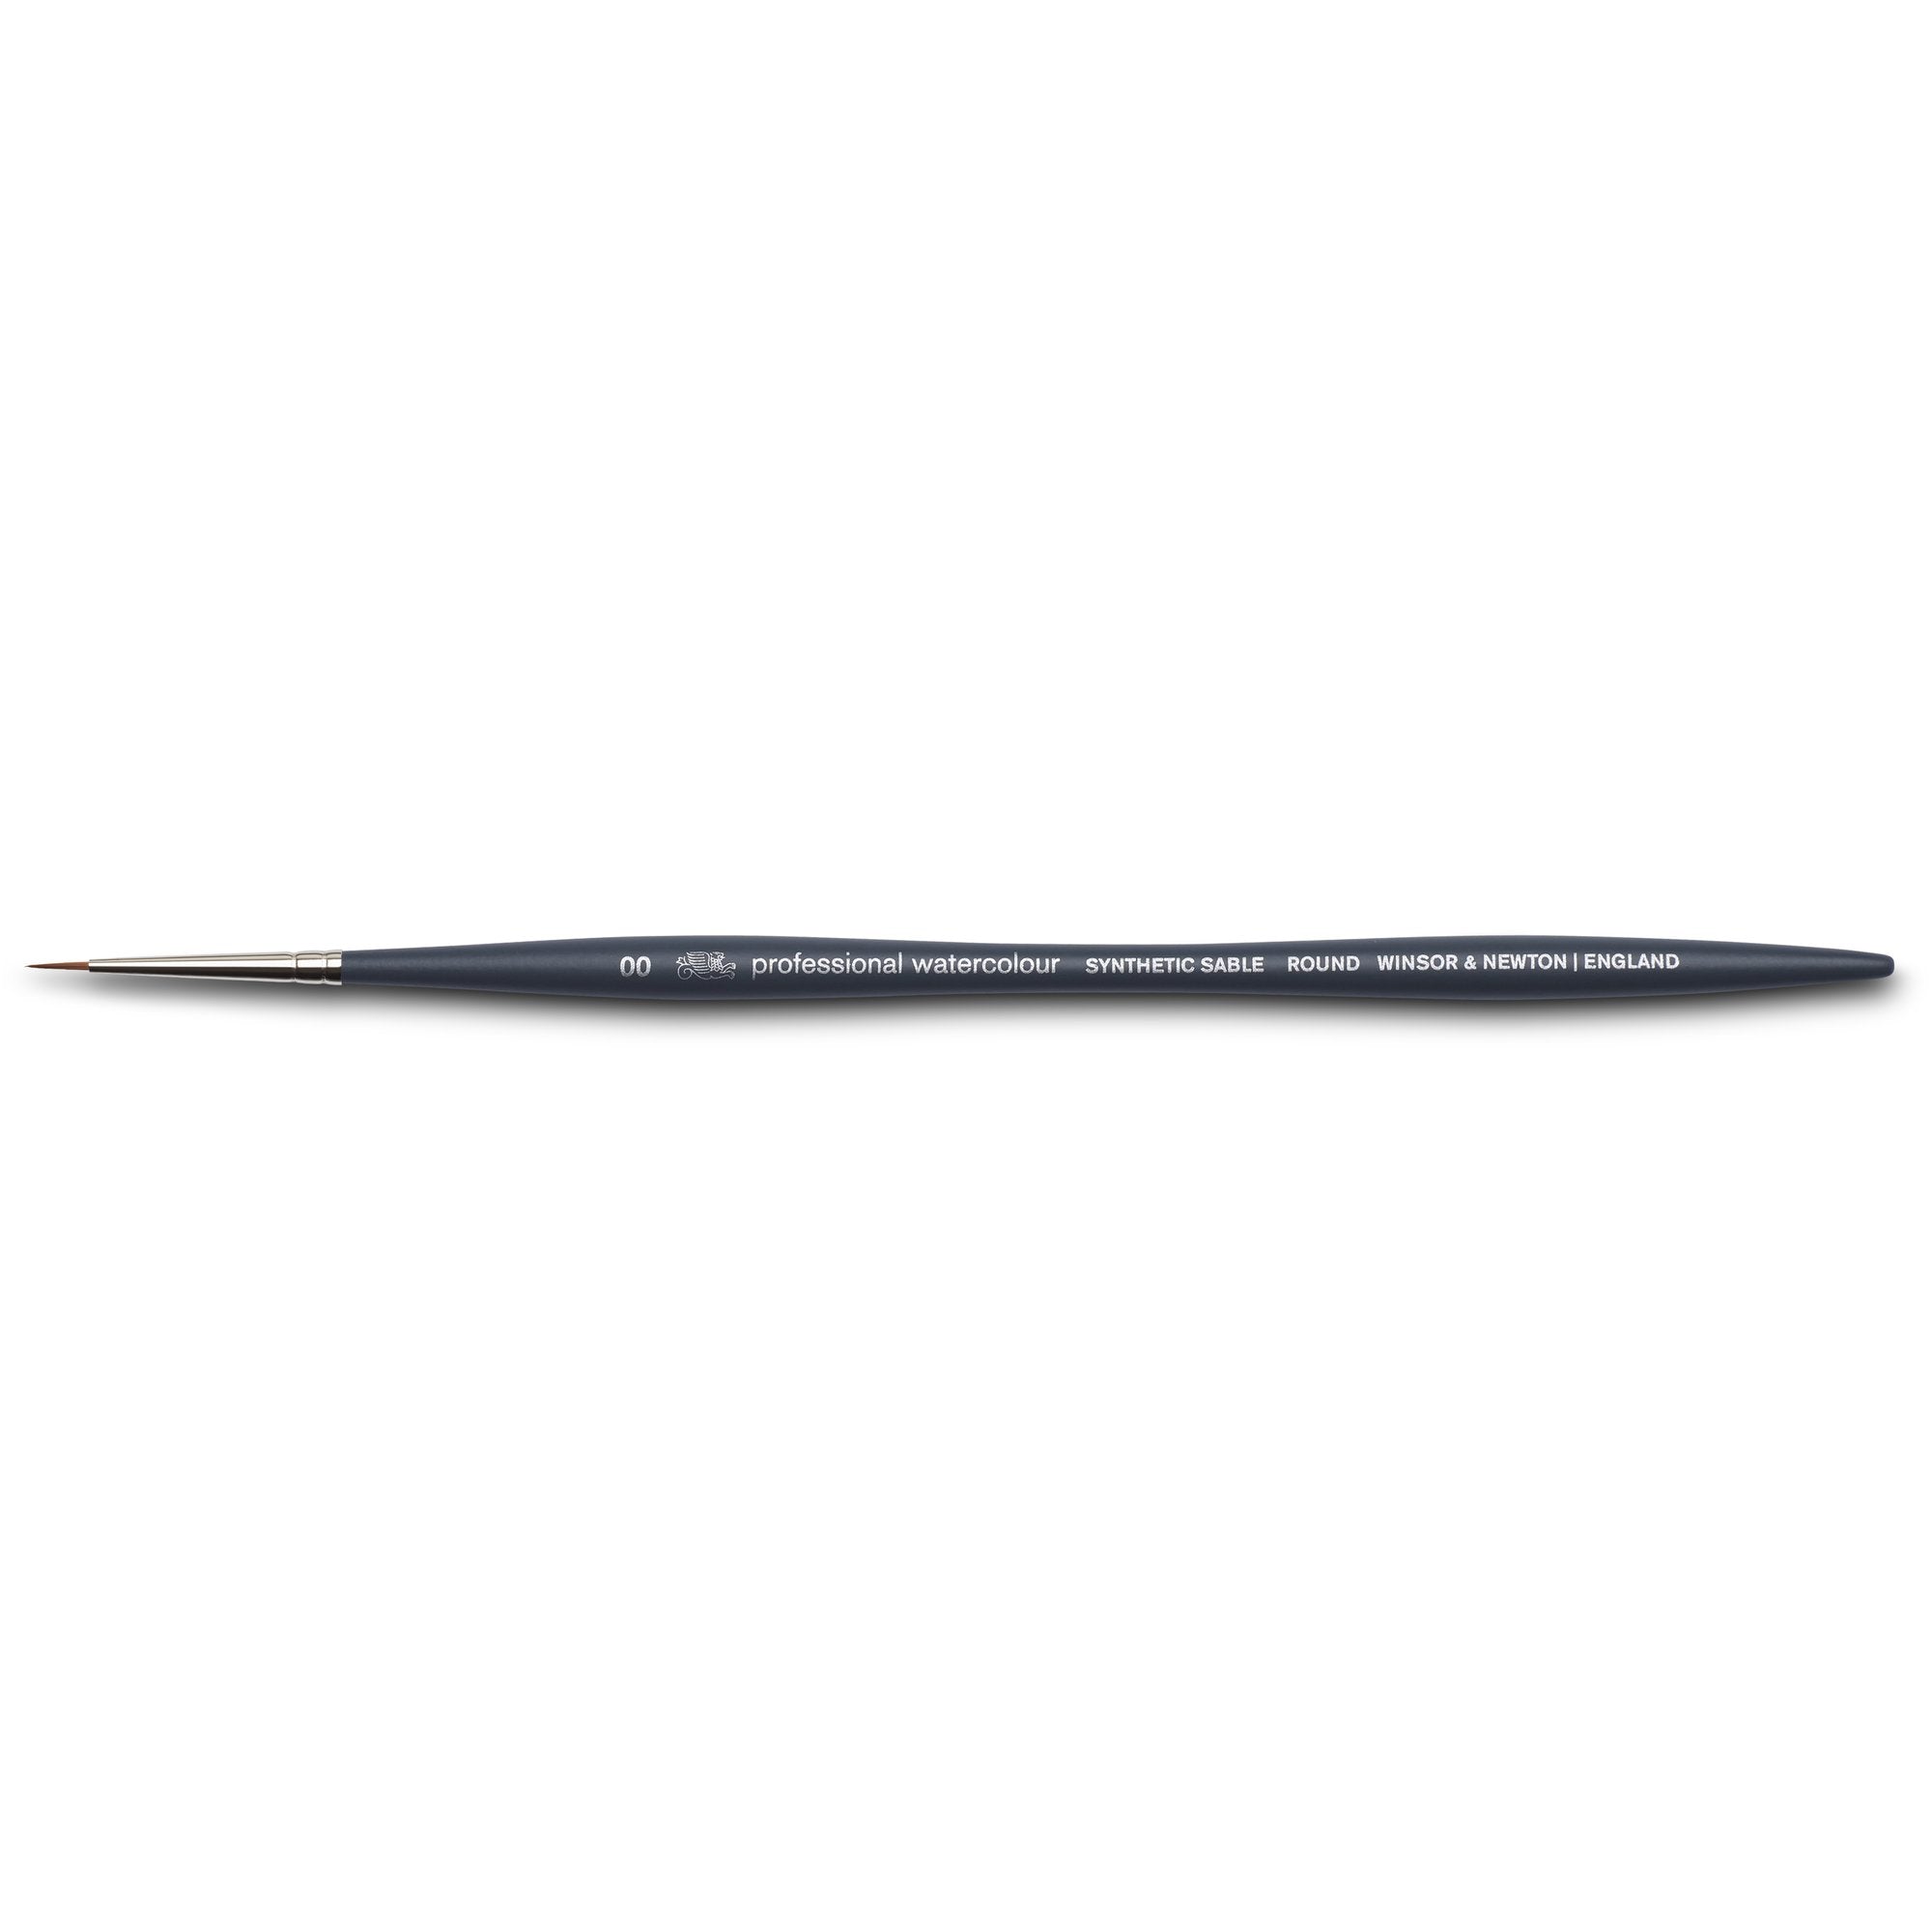 884955075074Winsor & Newton have created a new line professional synthetic sable brushes, made using the finest materials to rival natural sable. 